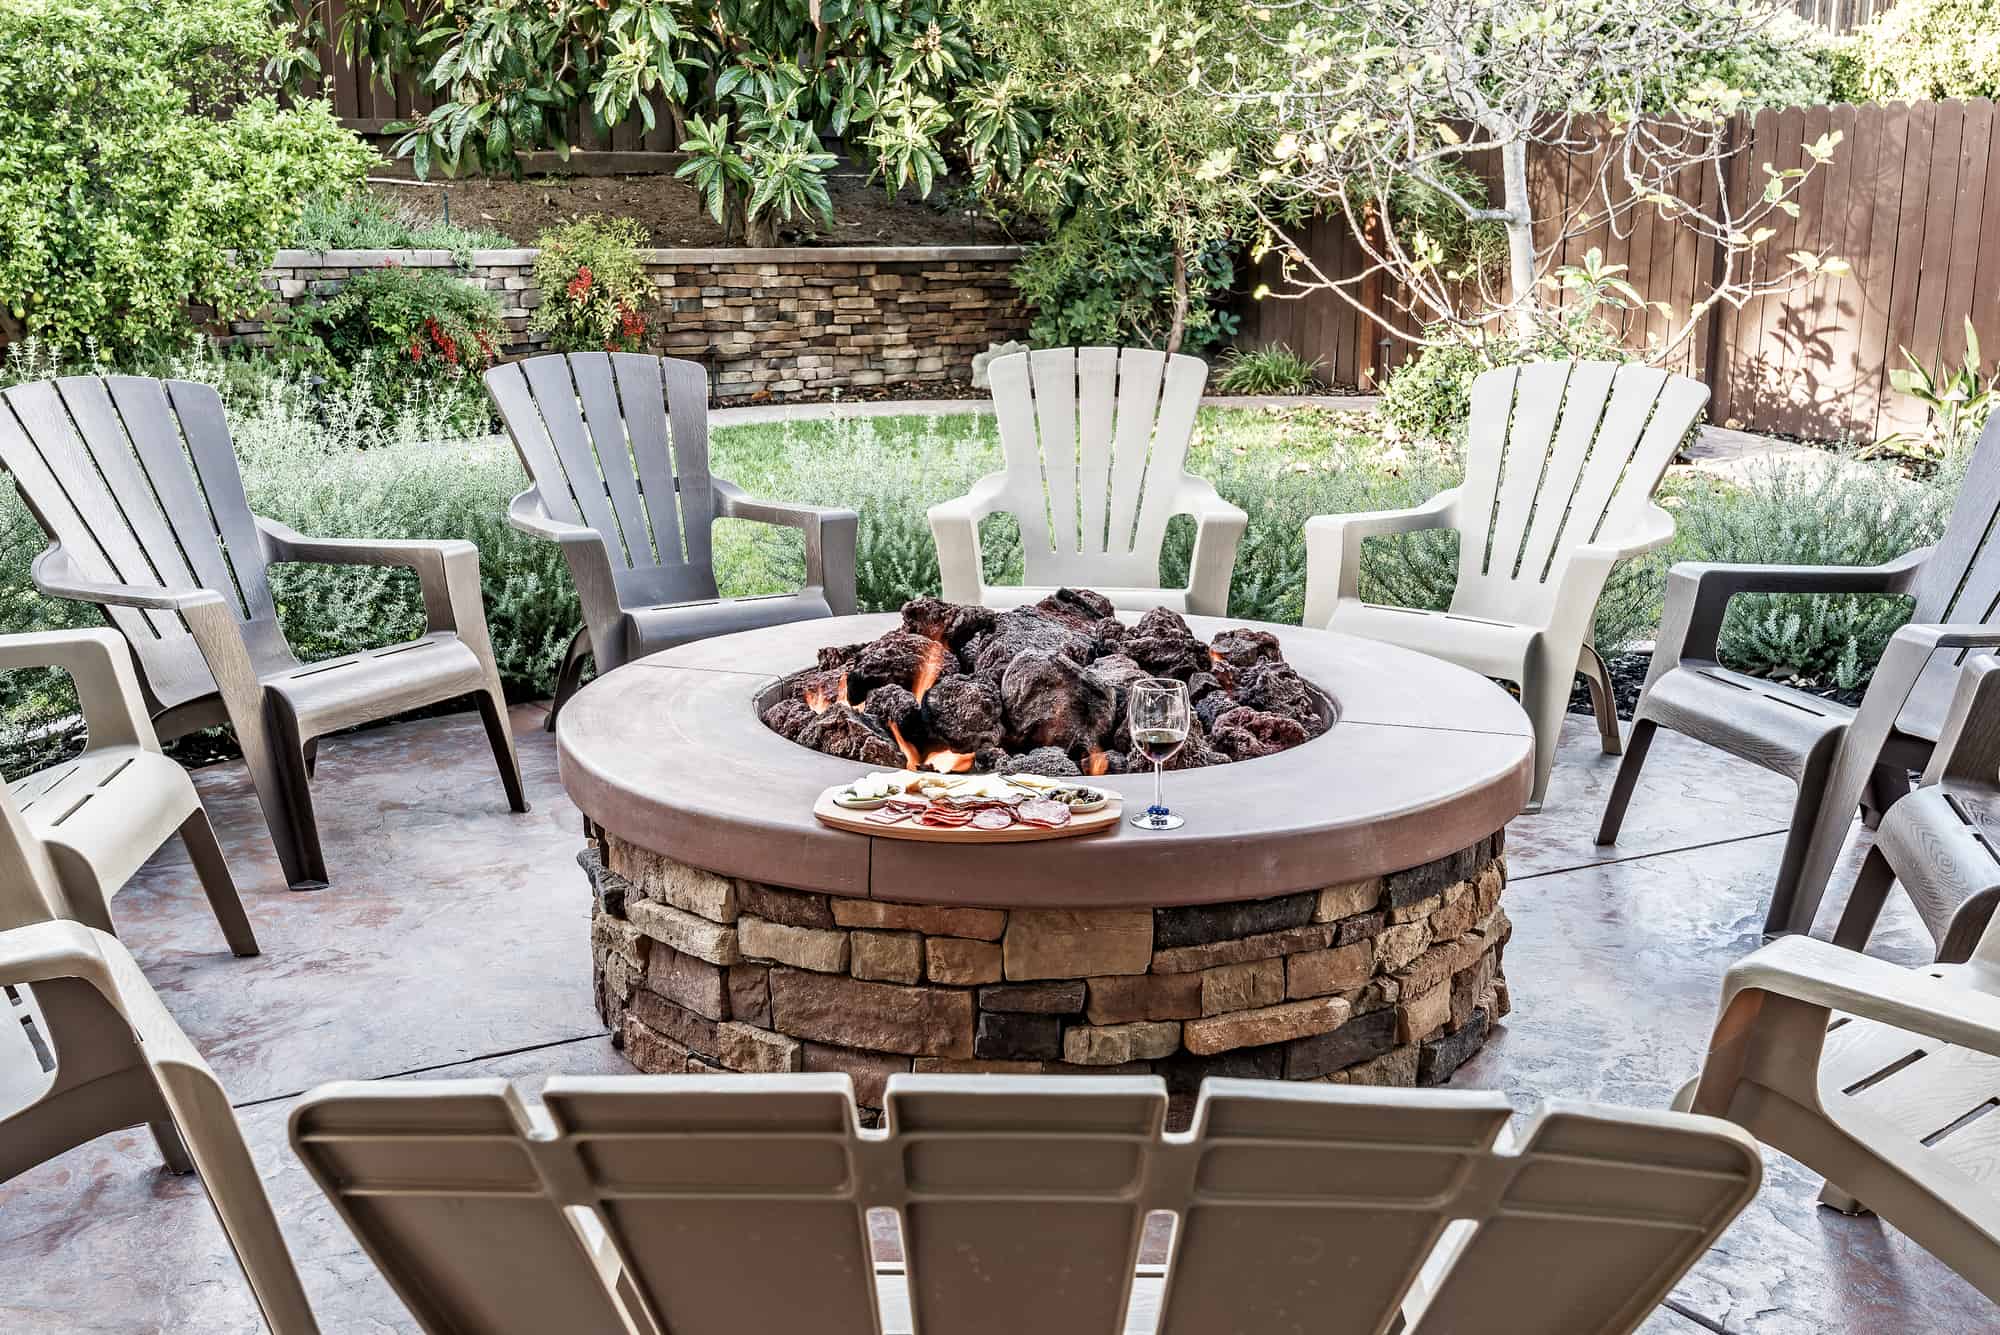 Can I Burn Wood In A Gas Fire Pit, Gas Fire Pit Or Wood Burning